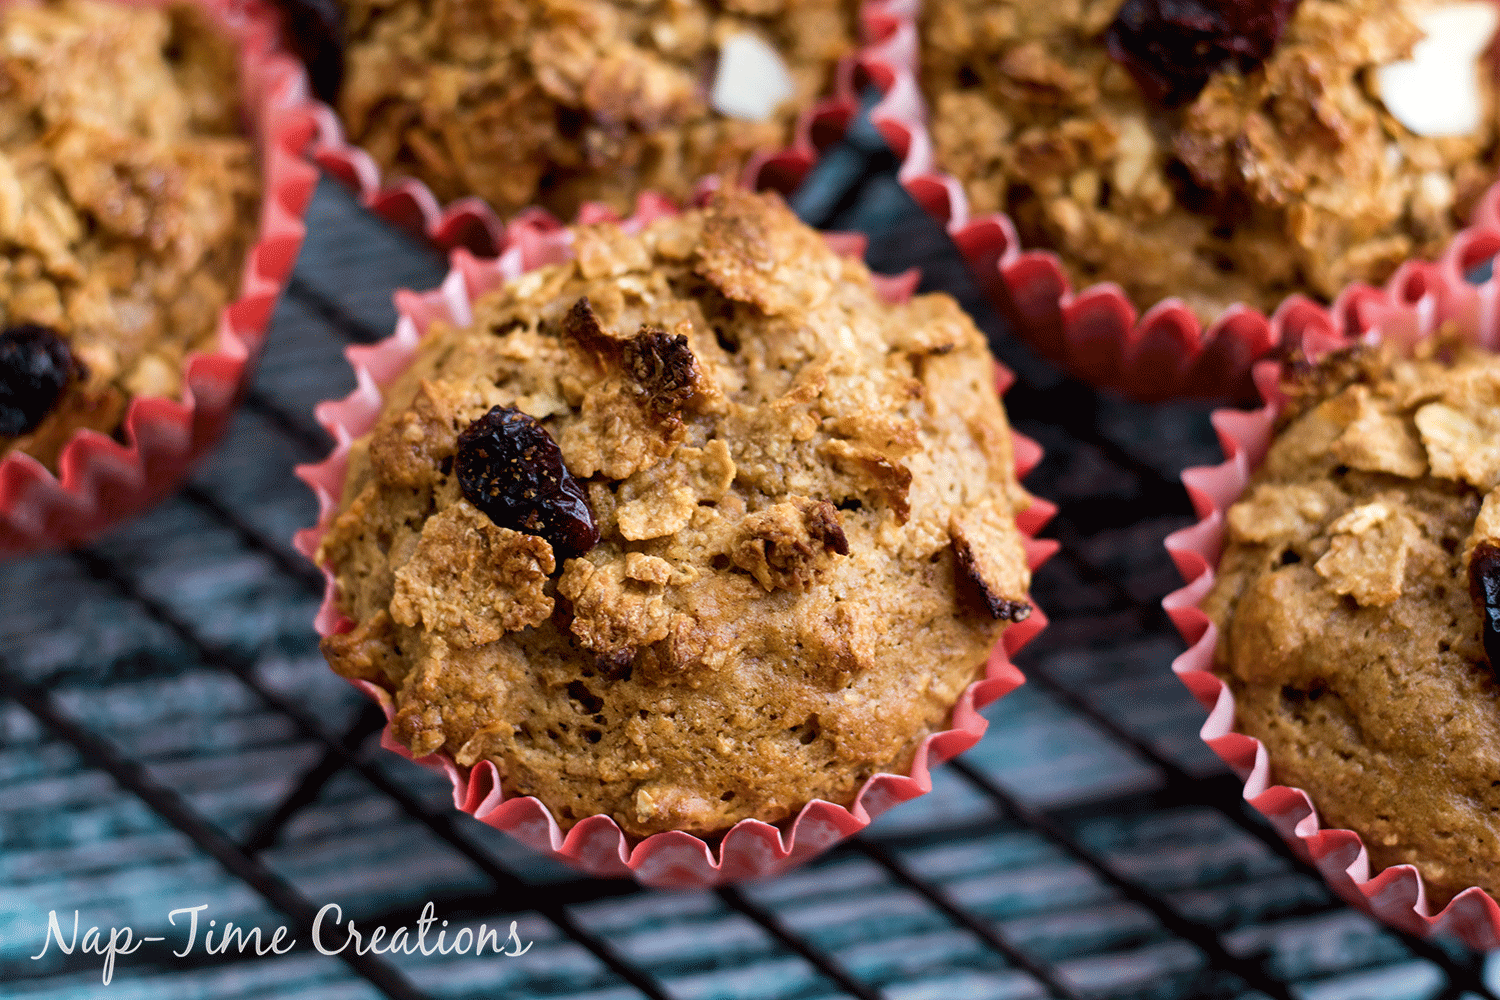 Great-Grains-Cereal-Muffins_16